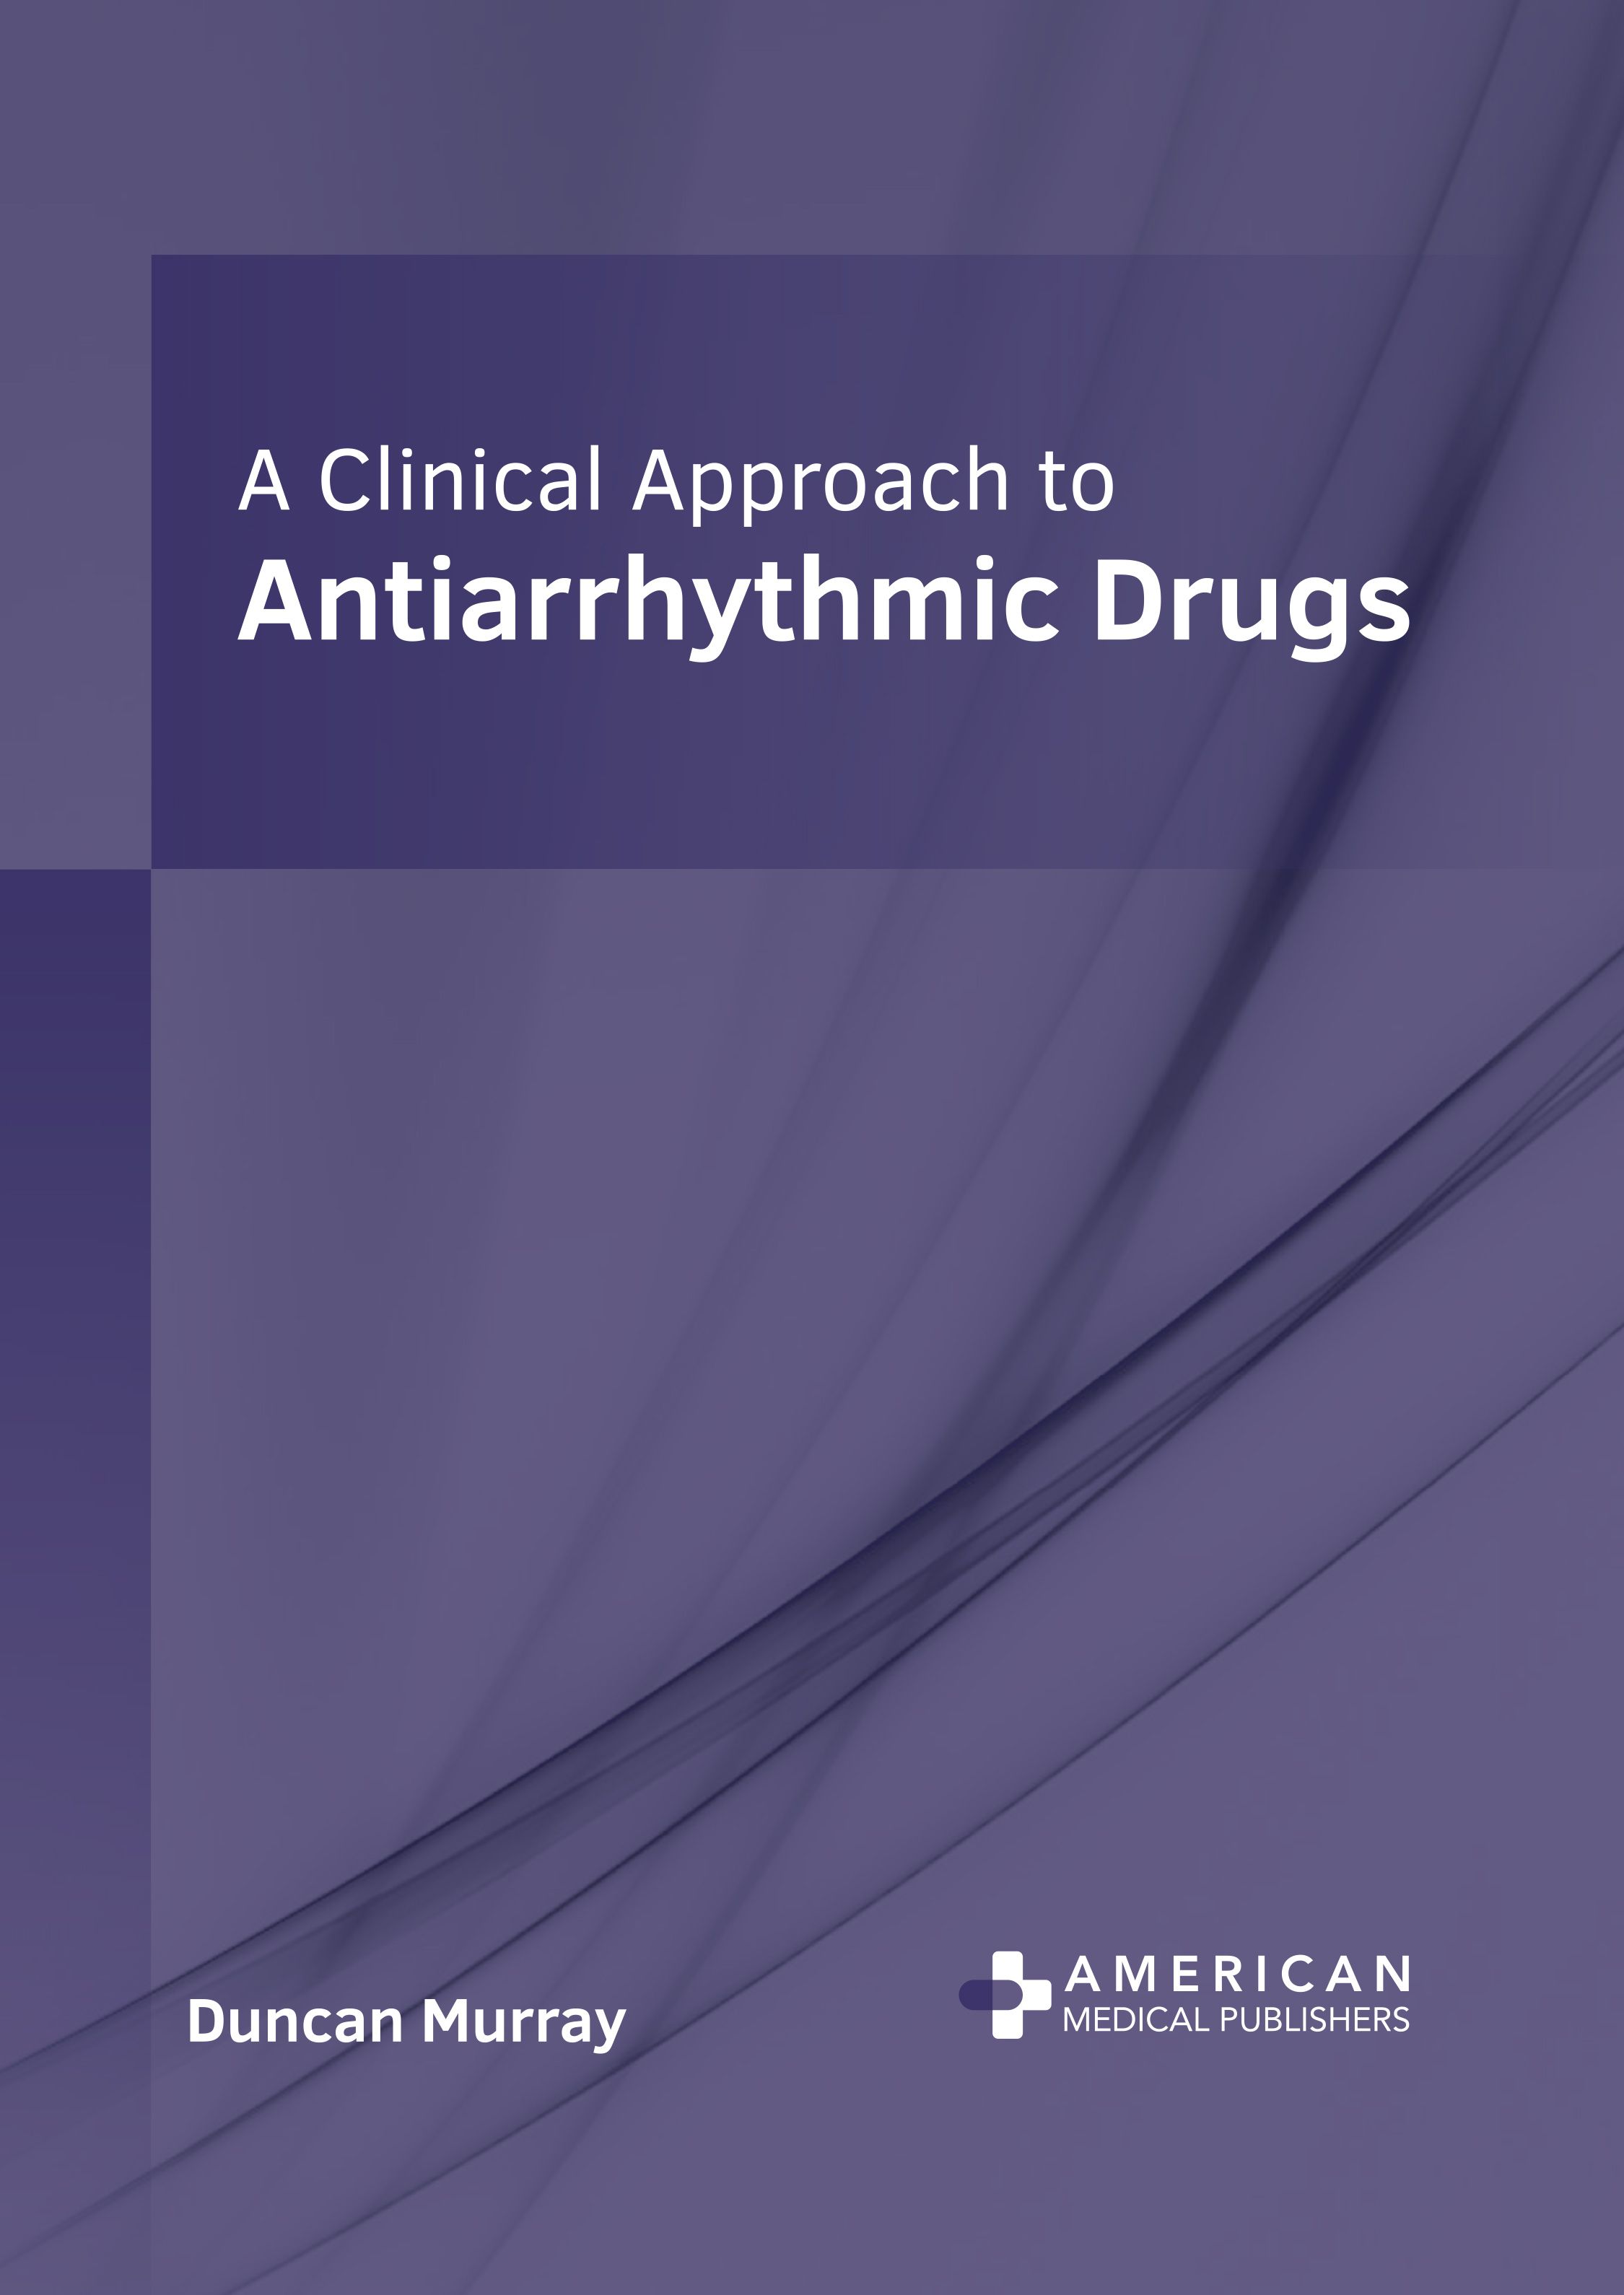 A CLINICAL APPROACH TO ANTIARRHYTHMIC DRUGS